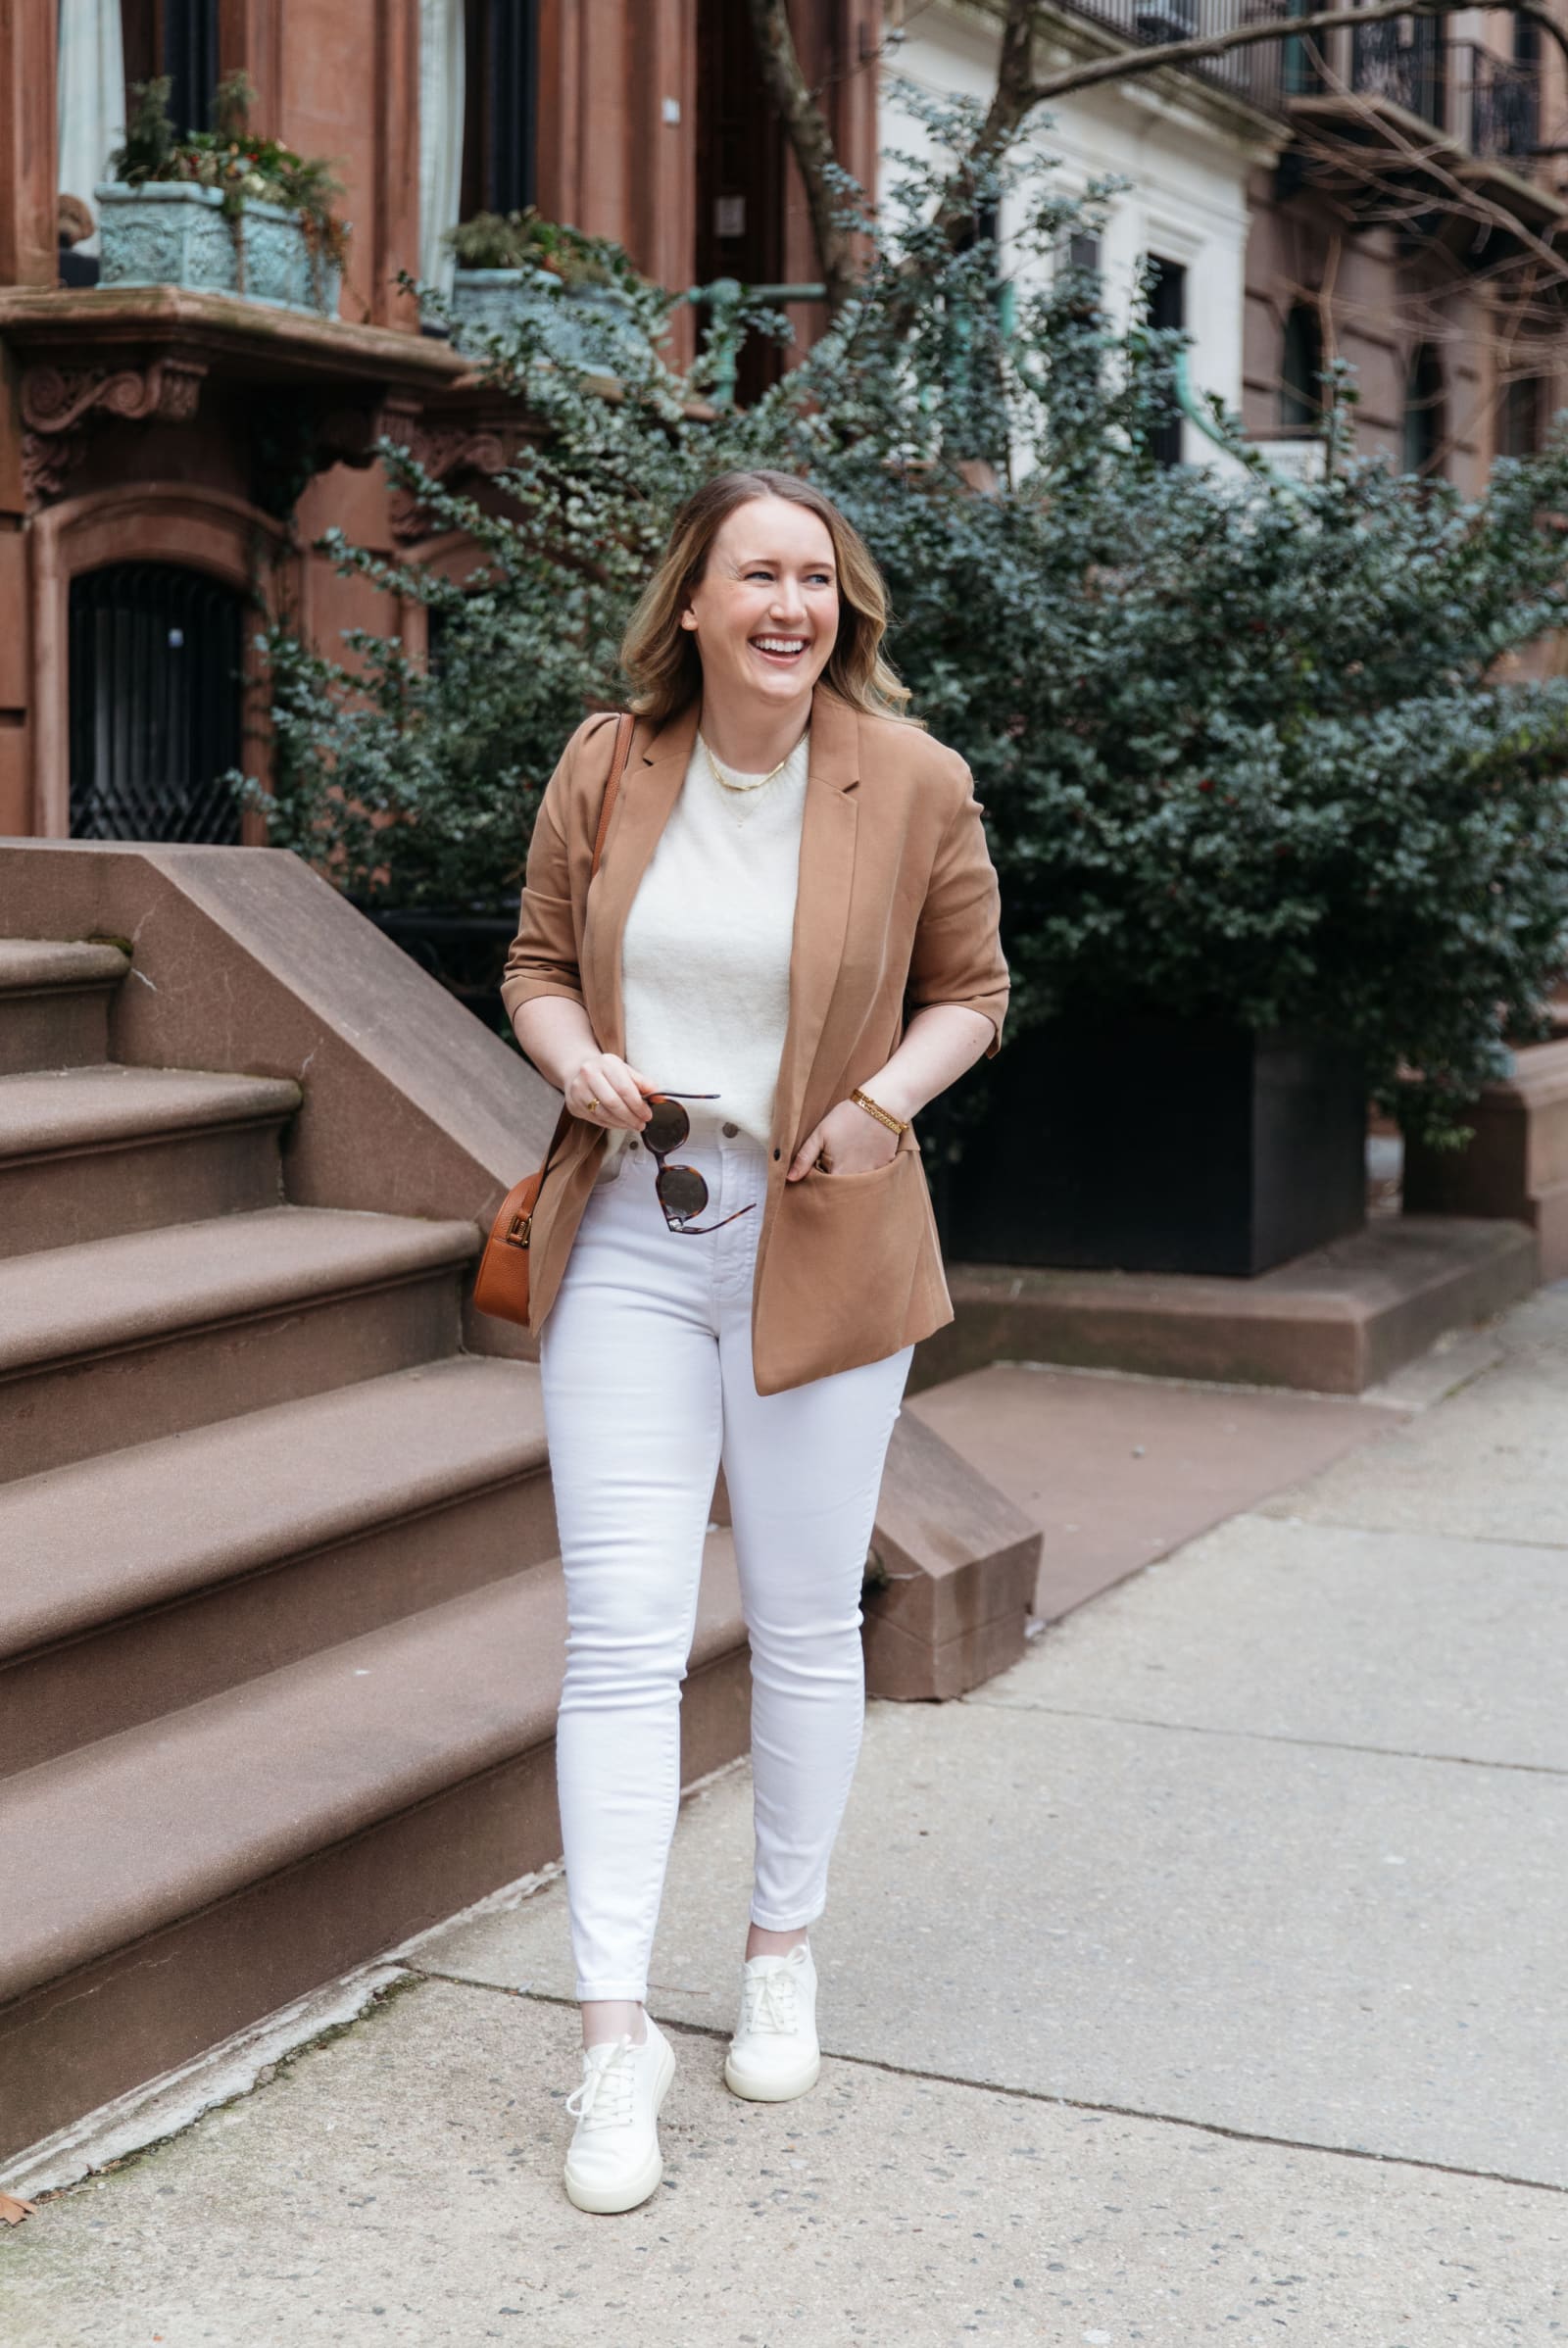 Styling a Blazer Casually for Spring